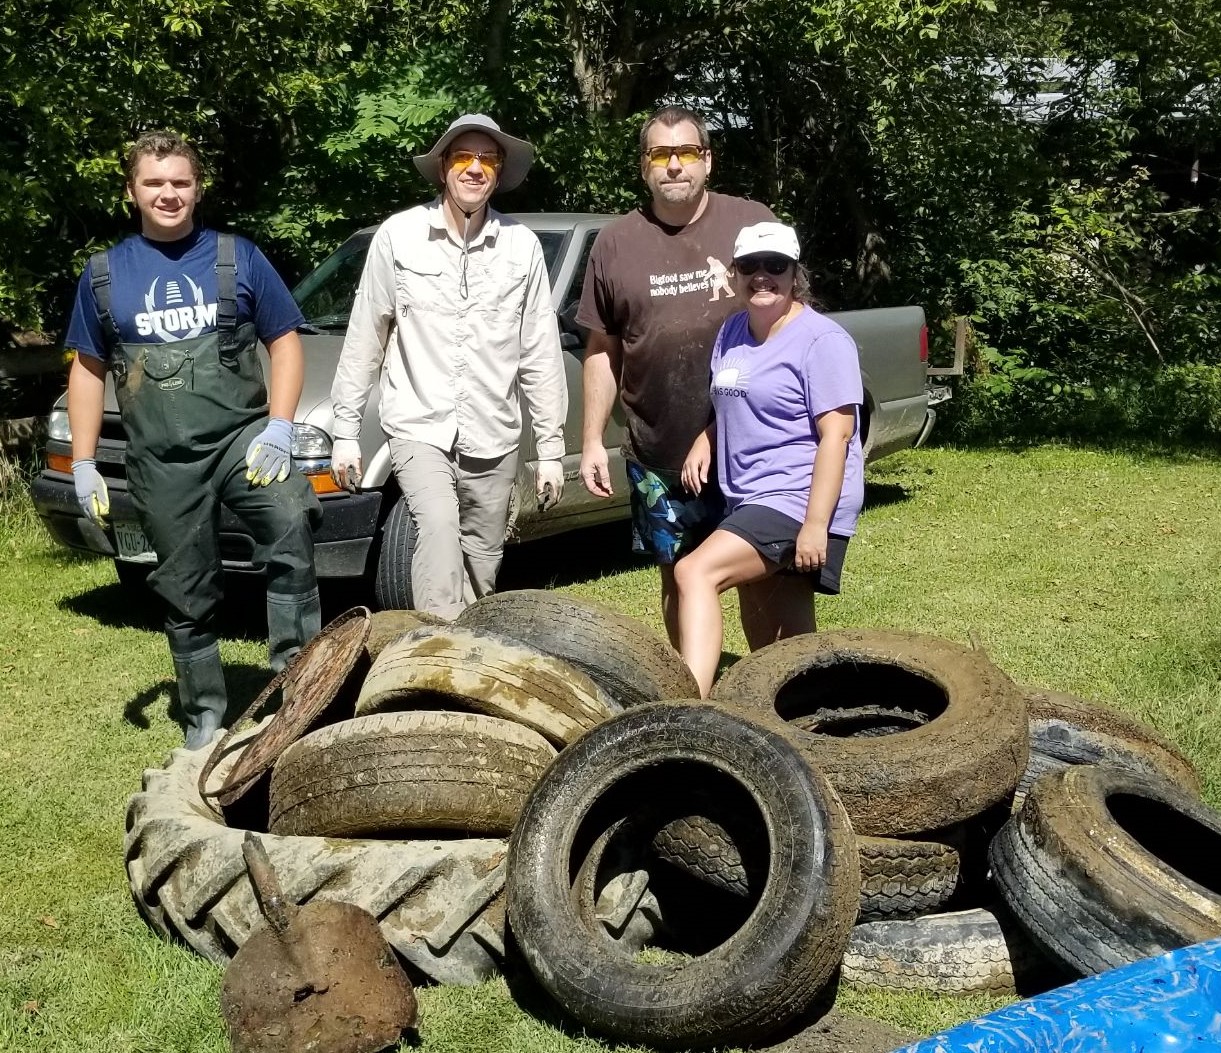 4 people stand  in front of old tires